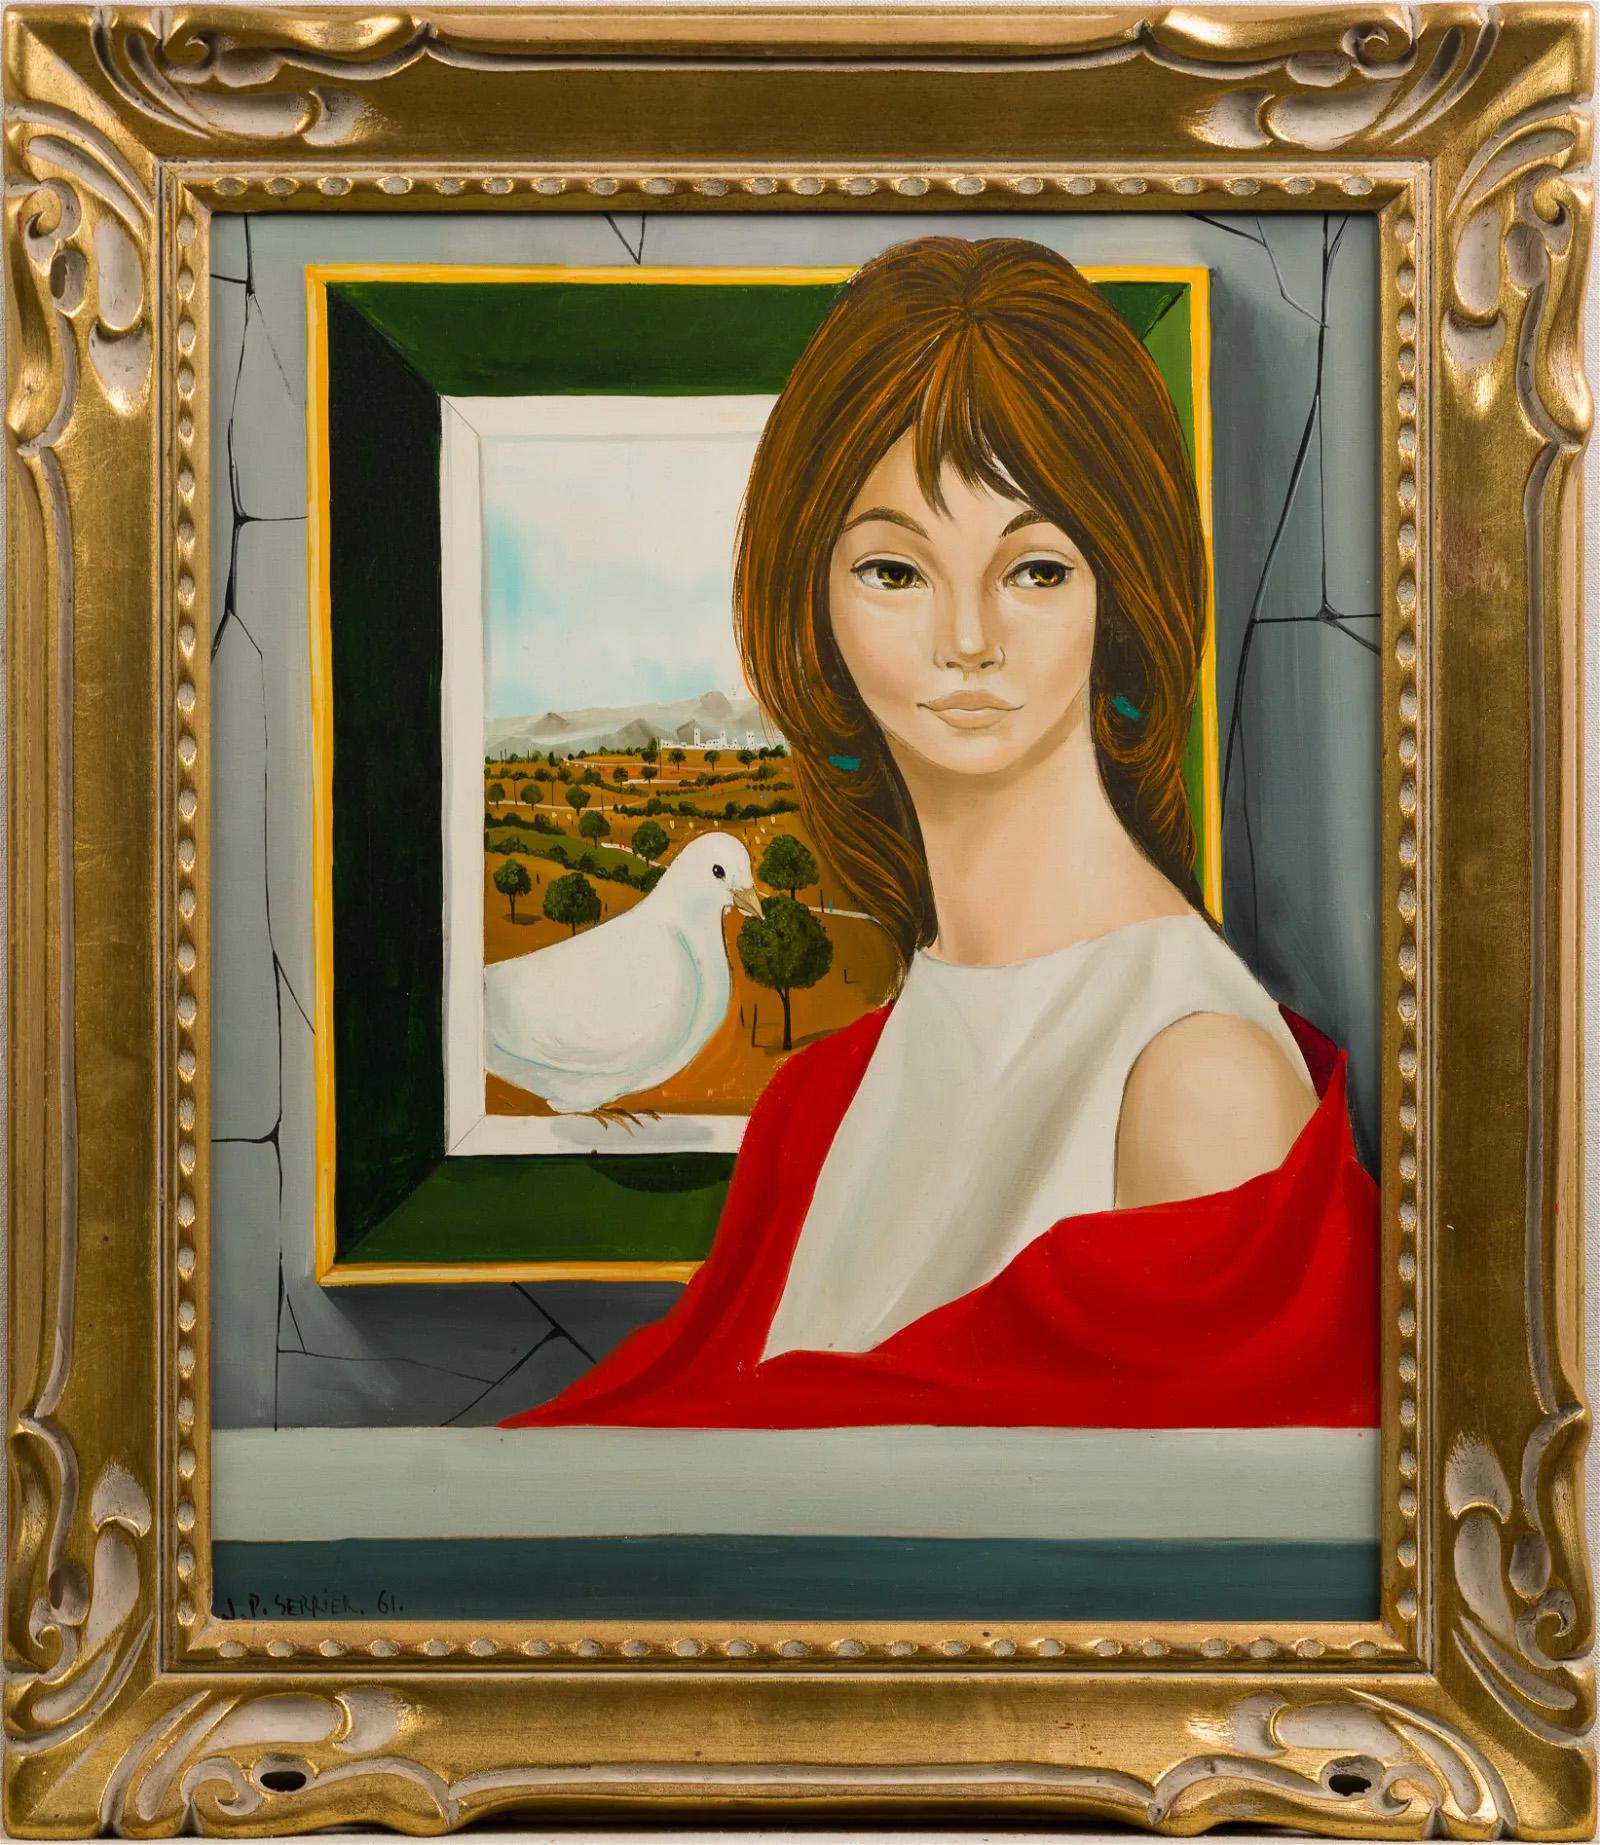 Jean Pierre Serrier Landscape Painting -  Vintage French Surreal Young Woman Portrait Framed Modernist Oil Painting